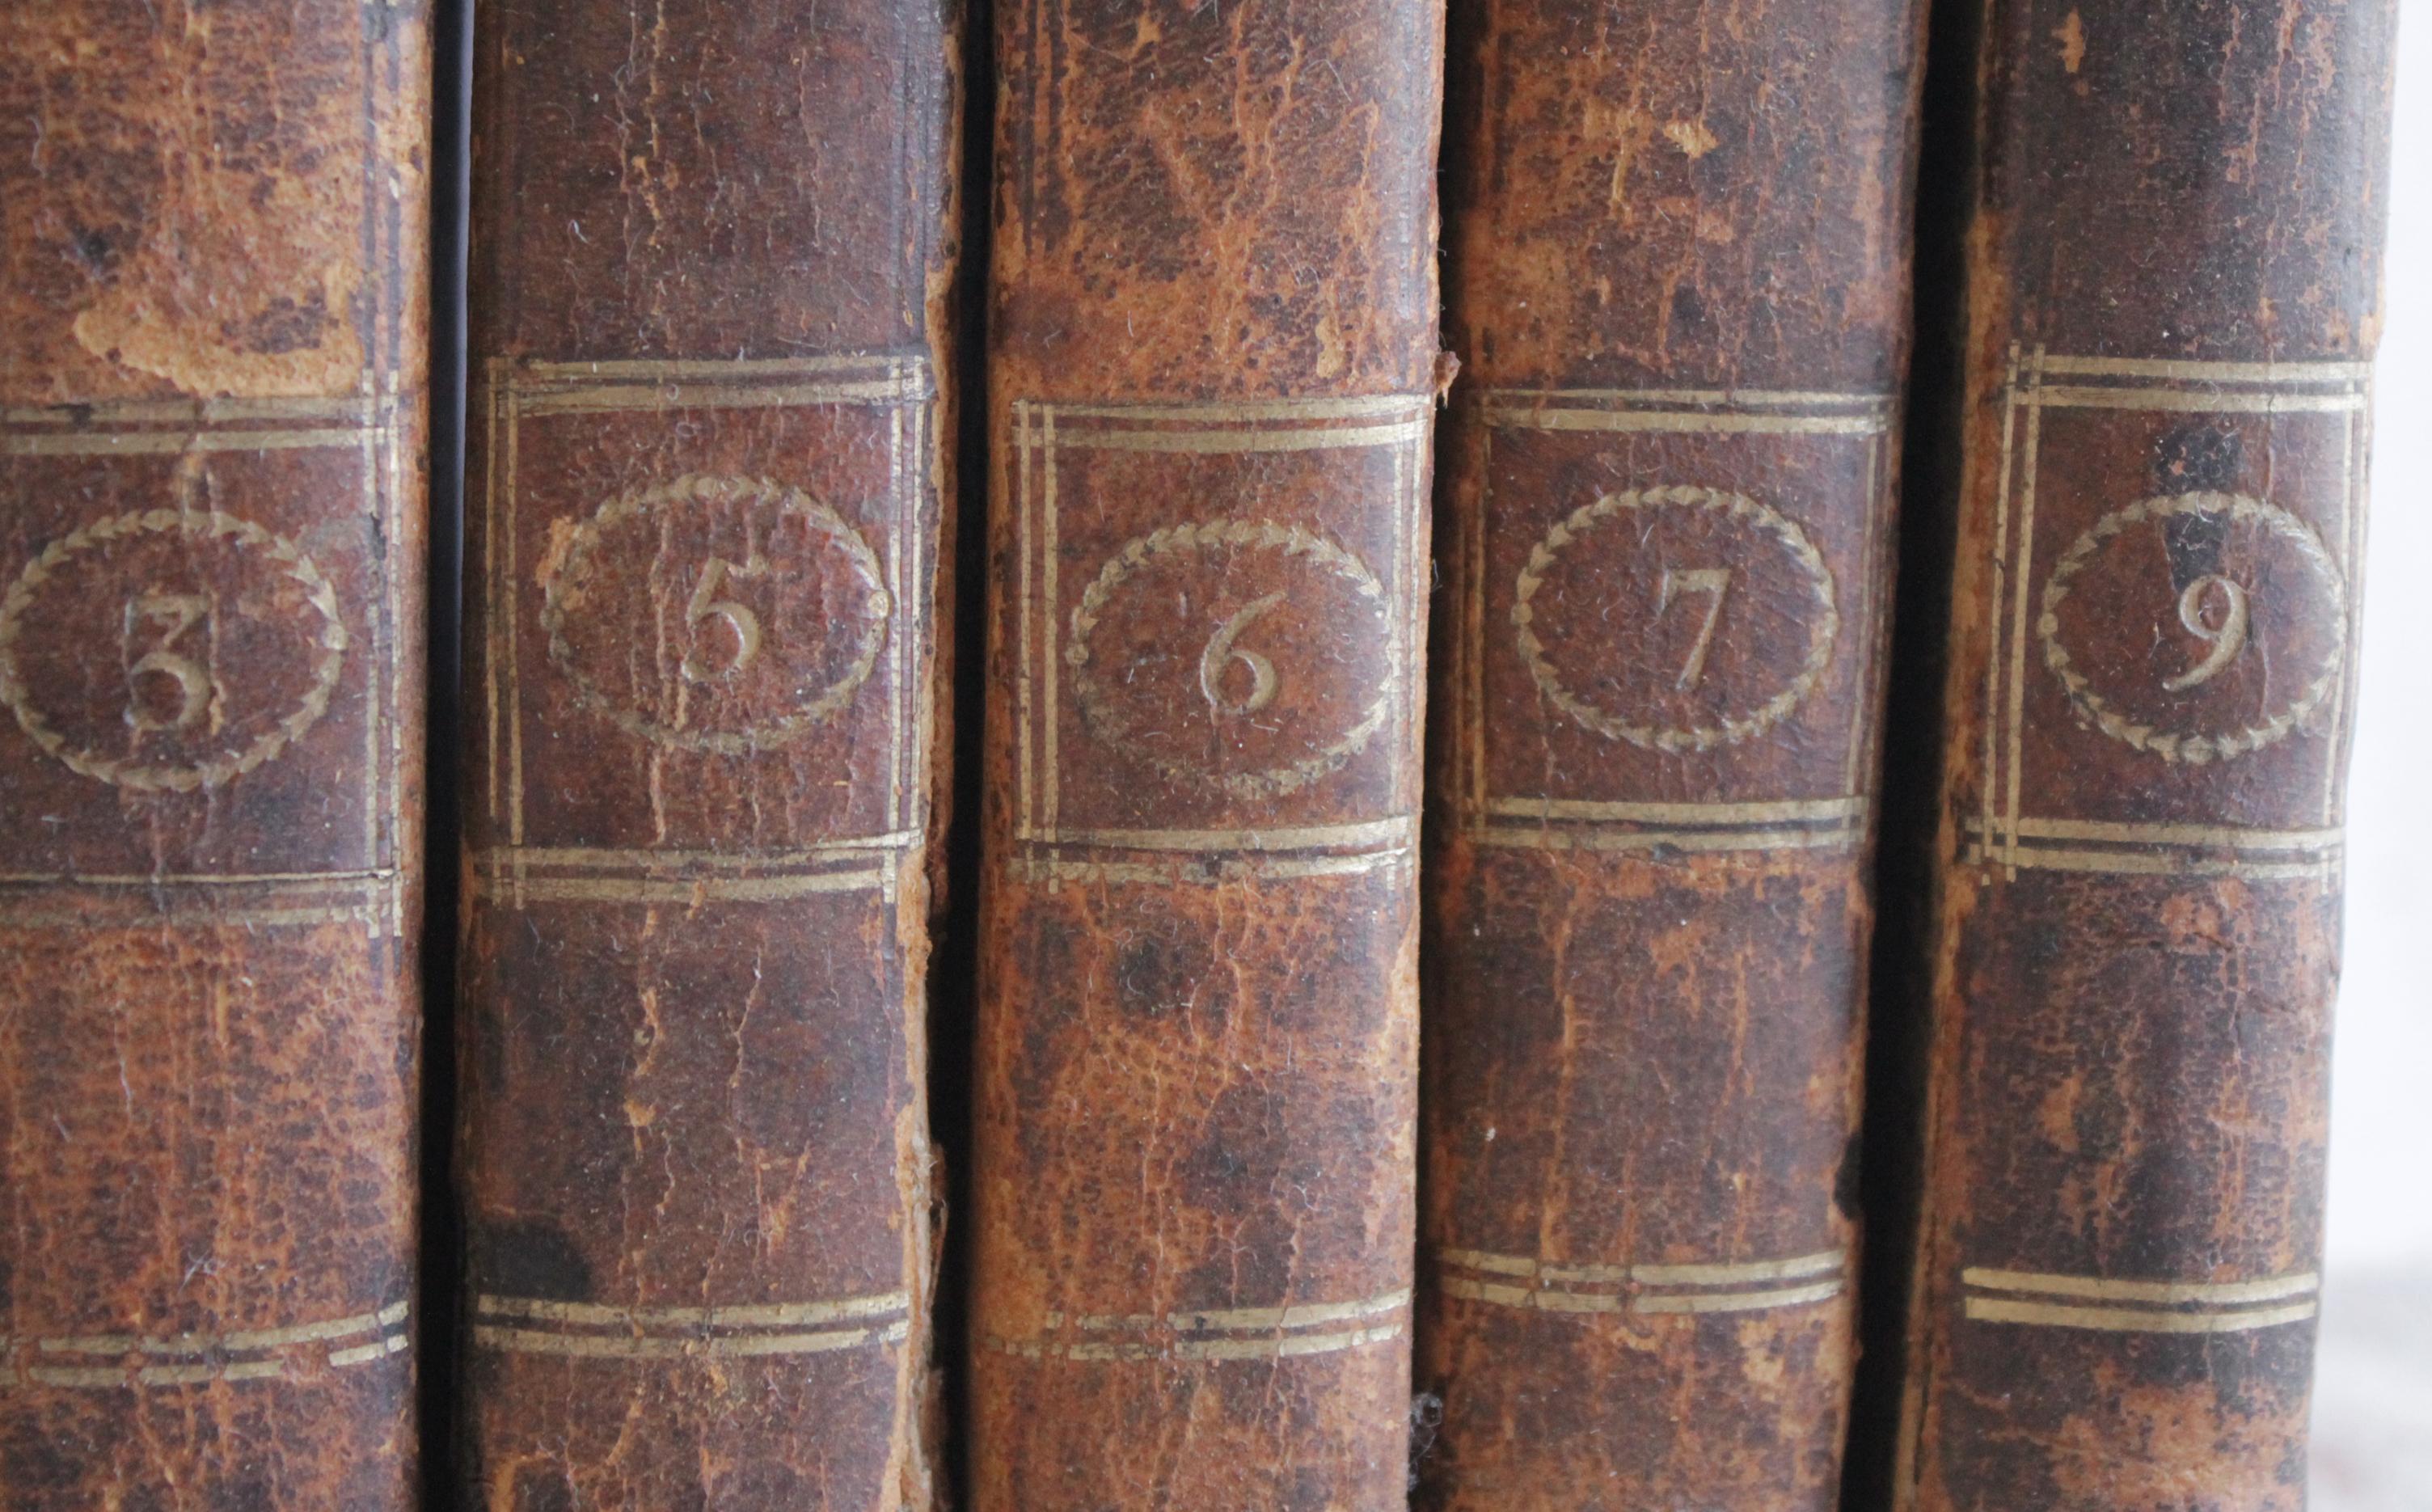 Set of 7 European Leather Bound Books Oeuvre de Oulange In Distressed Condition For Sale In Brea, CA